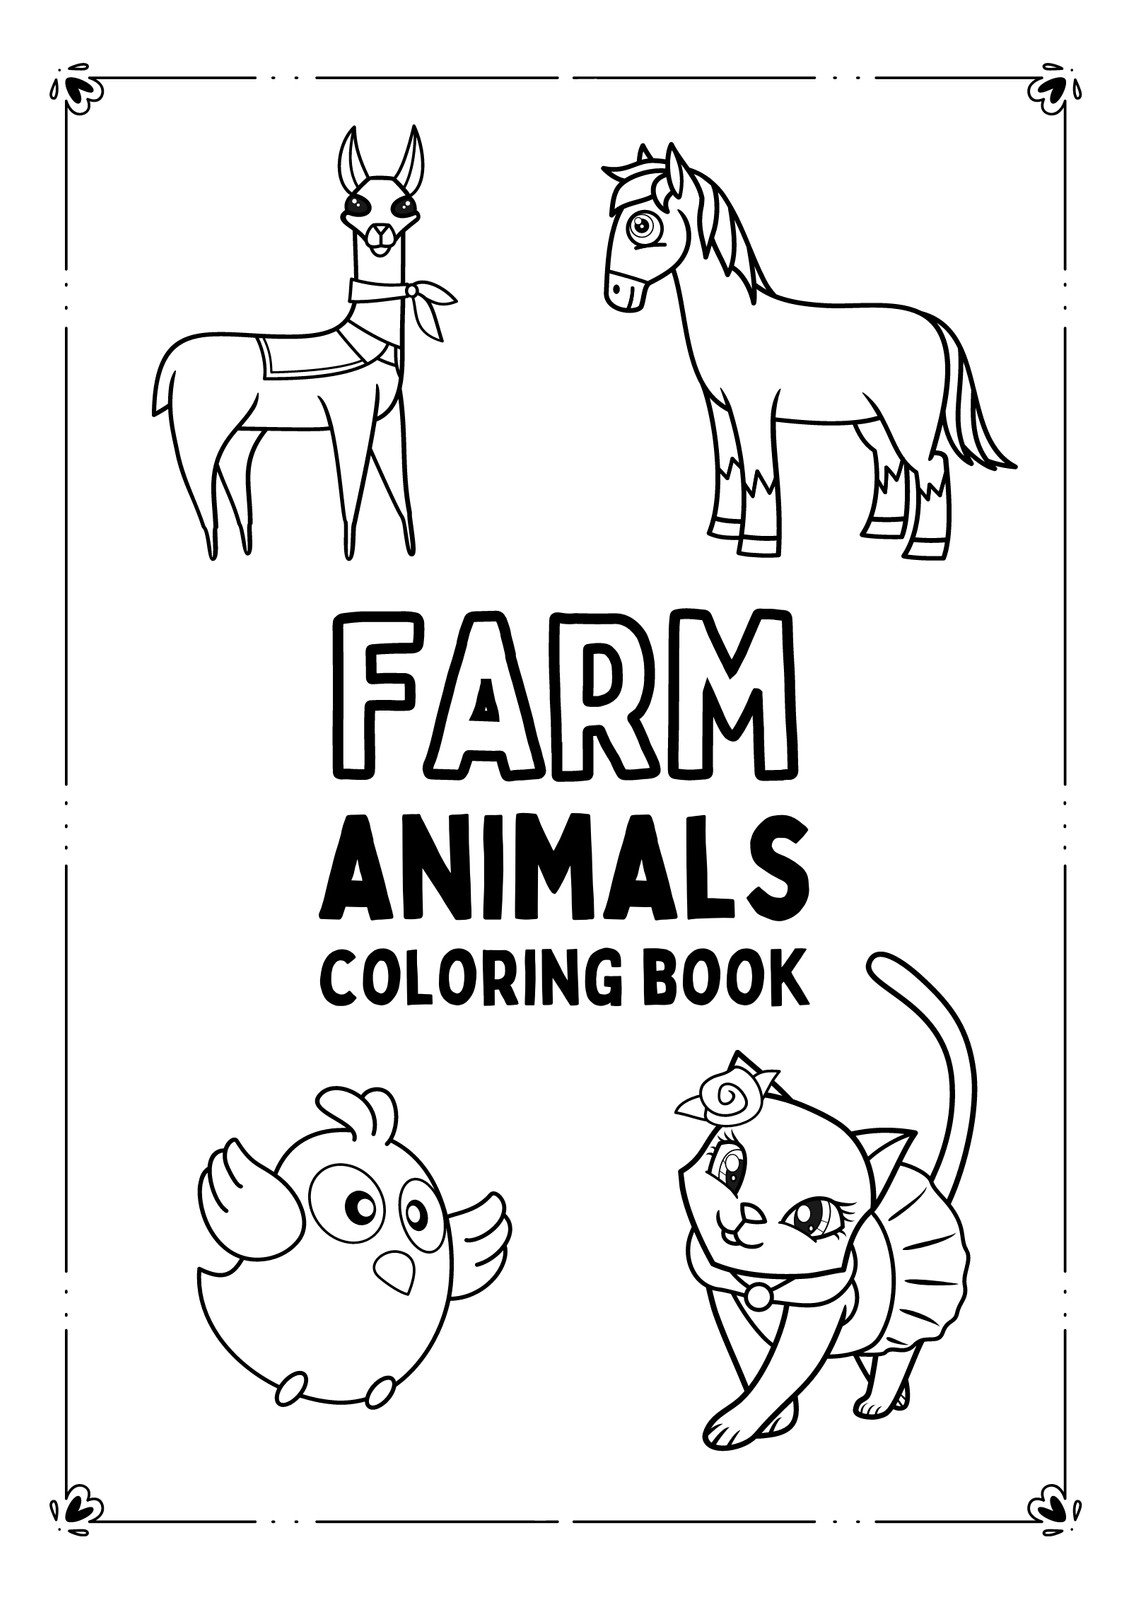 spring cleaning coloring pages